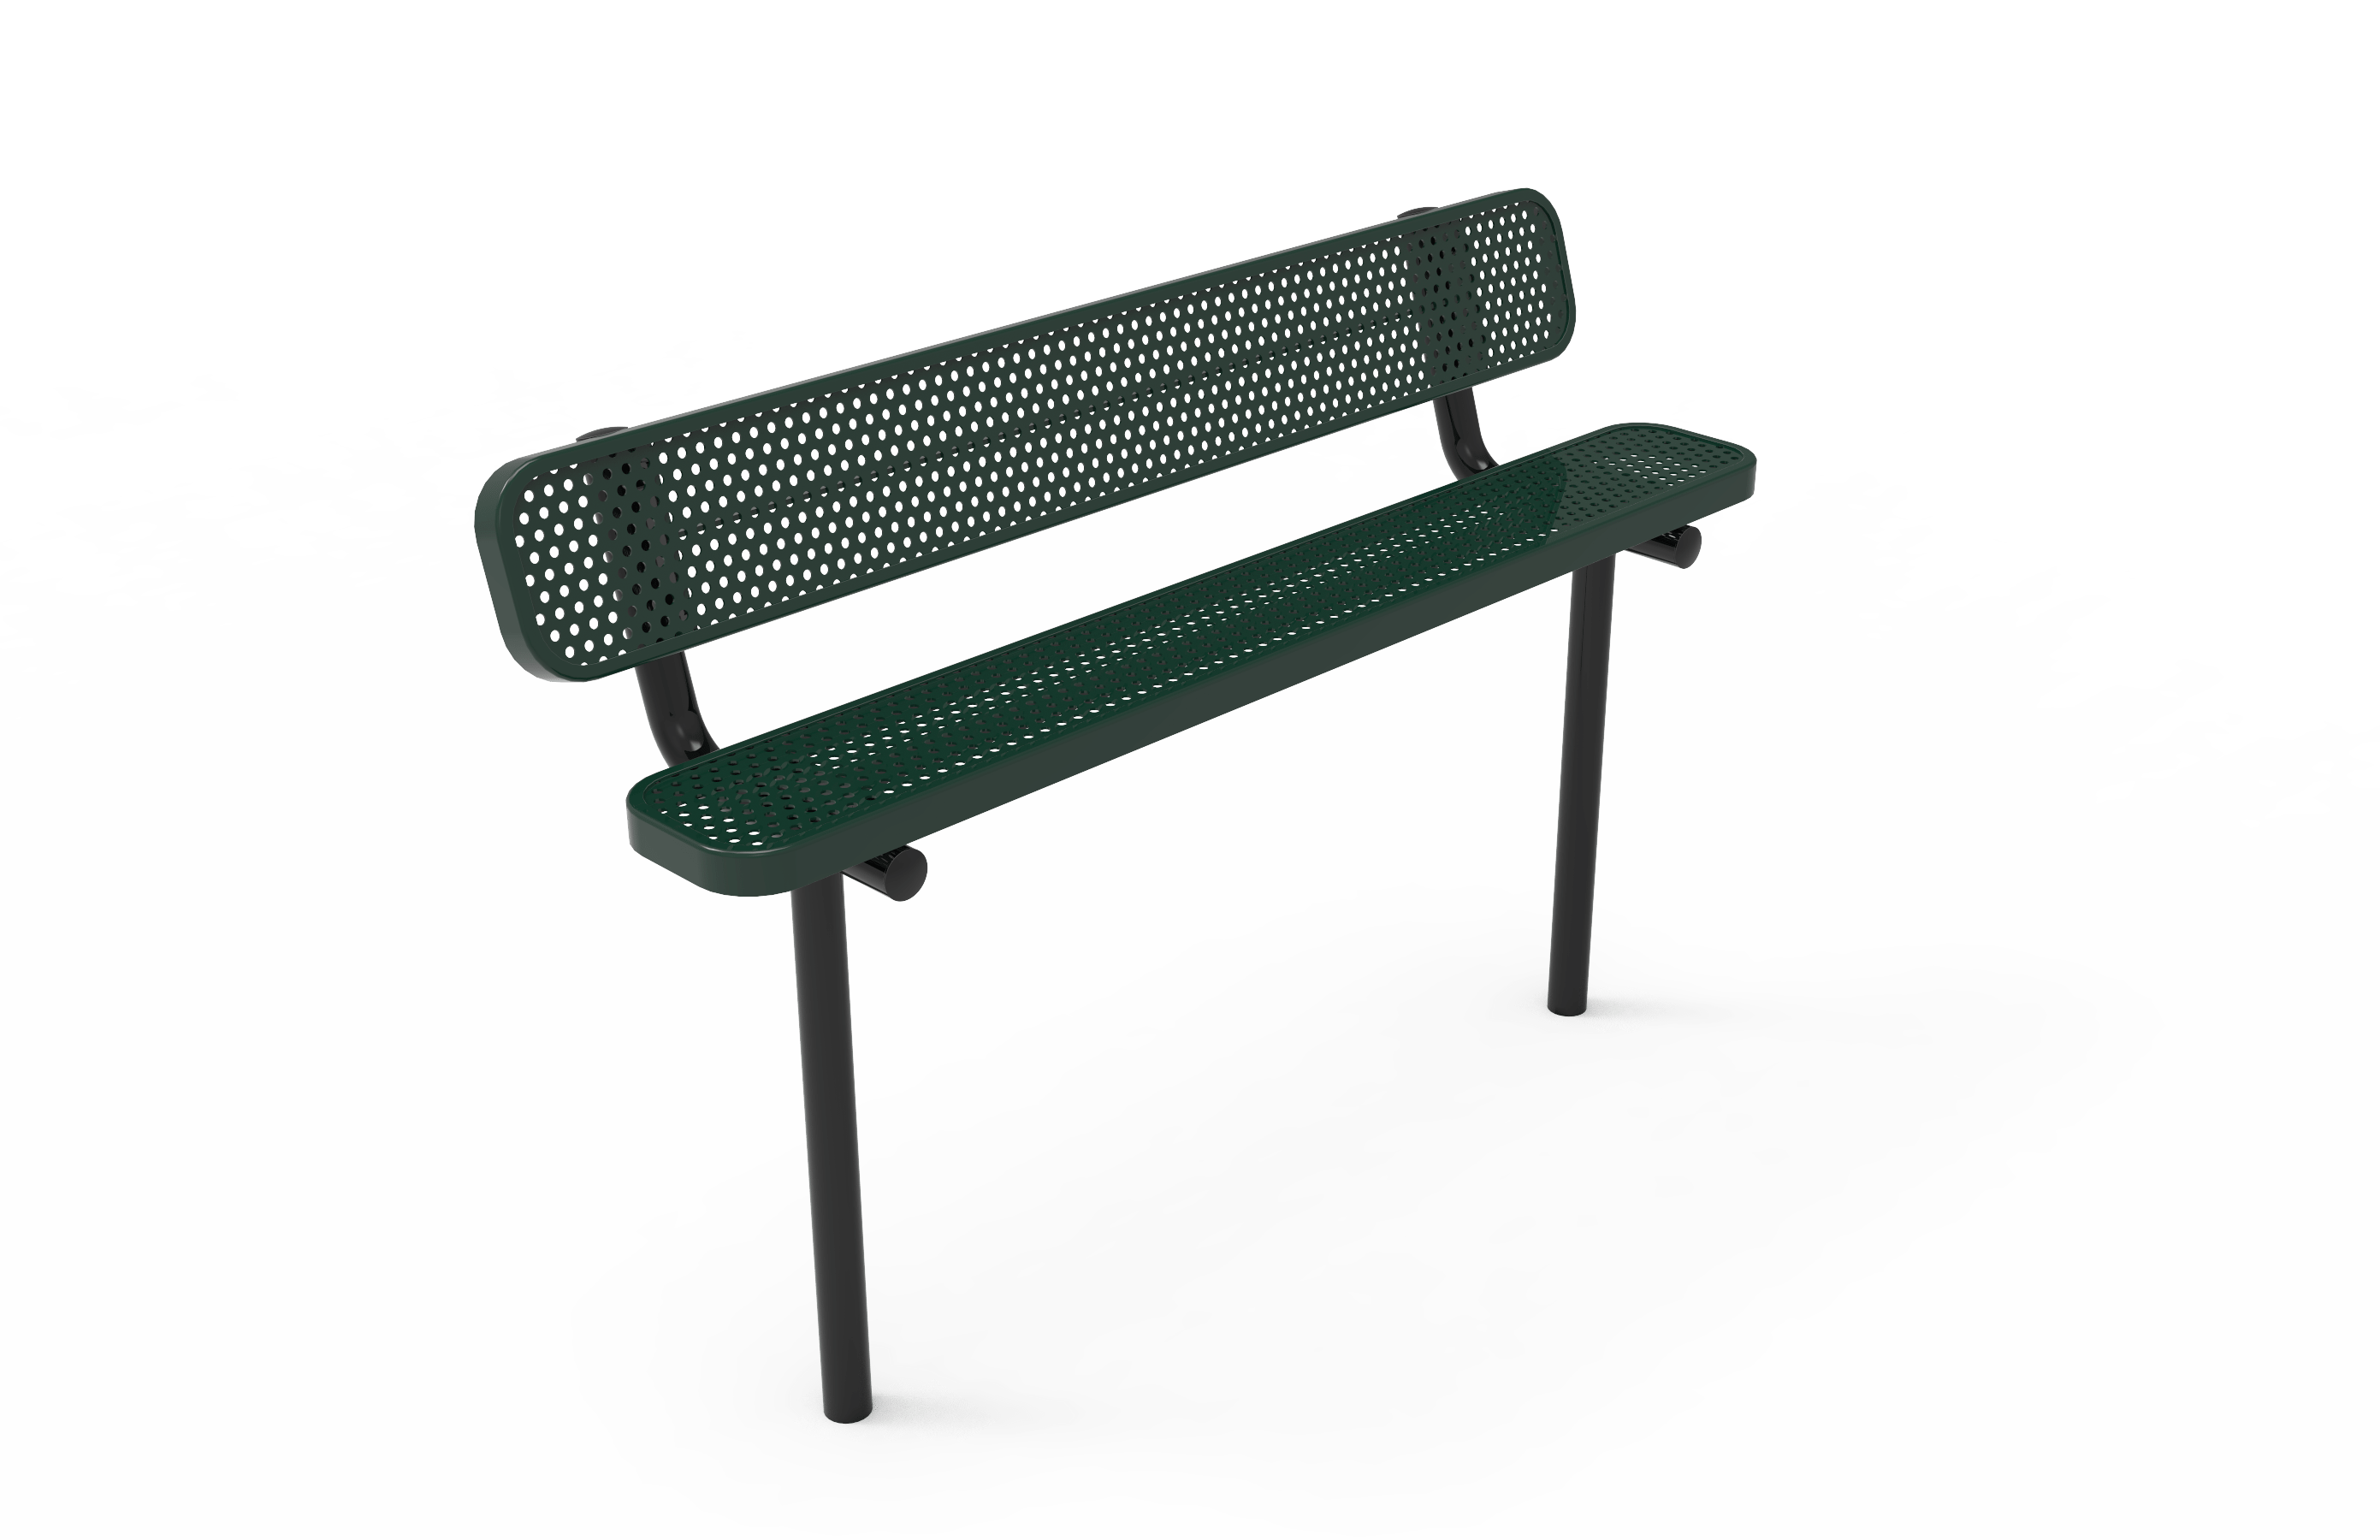 6′ Standard Bench With Back-Punched
BRT06-D-19-000
Industry Standard Finish
$609.00
BRT06-B-19-000
Advantage Premium Finish
$769.00
